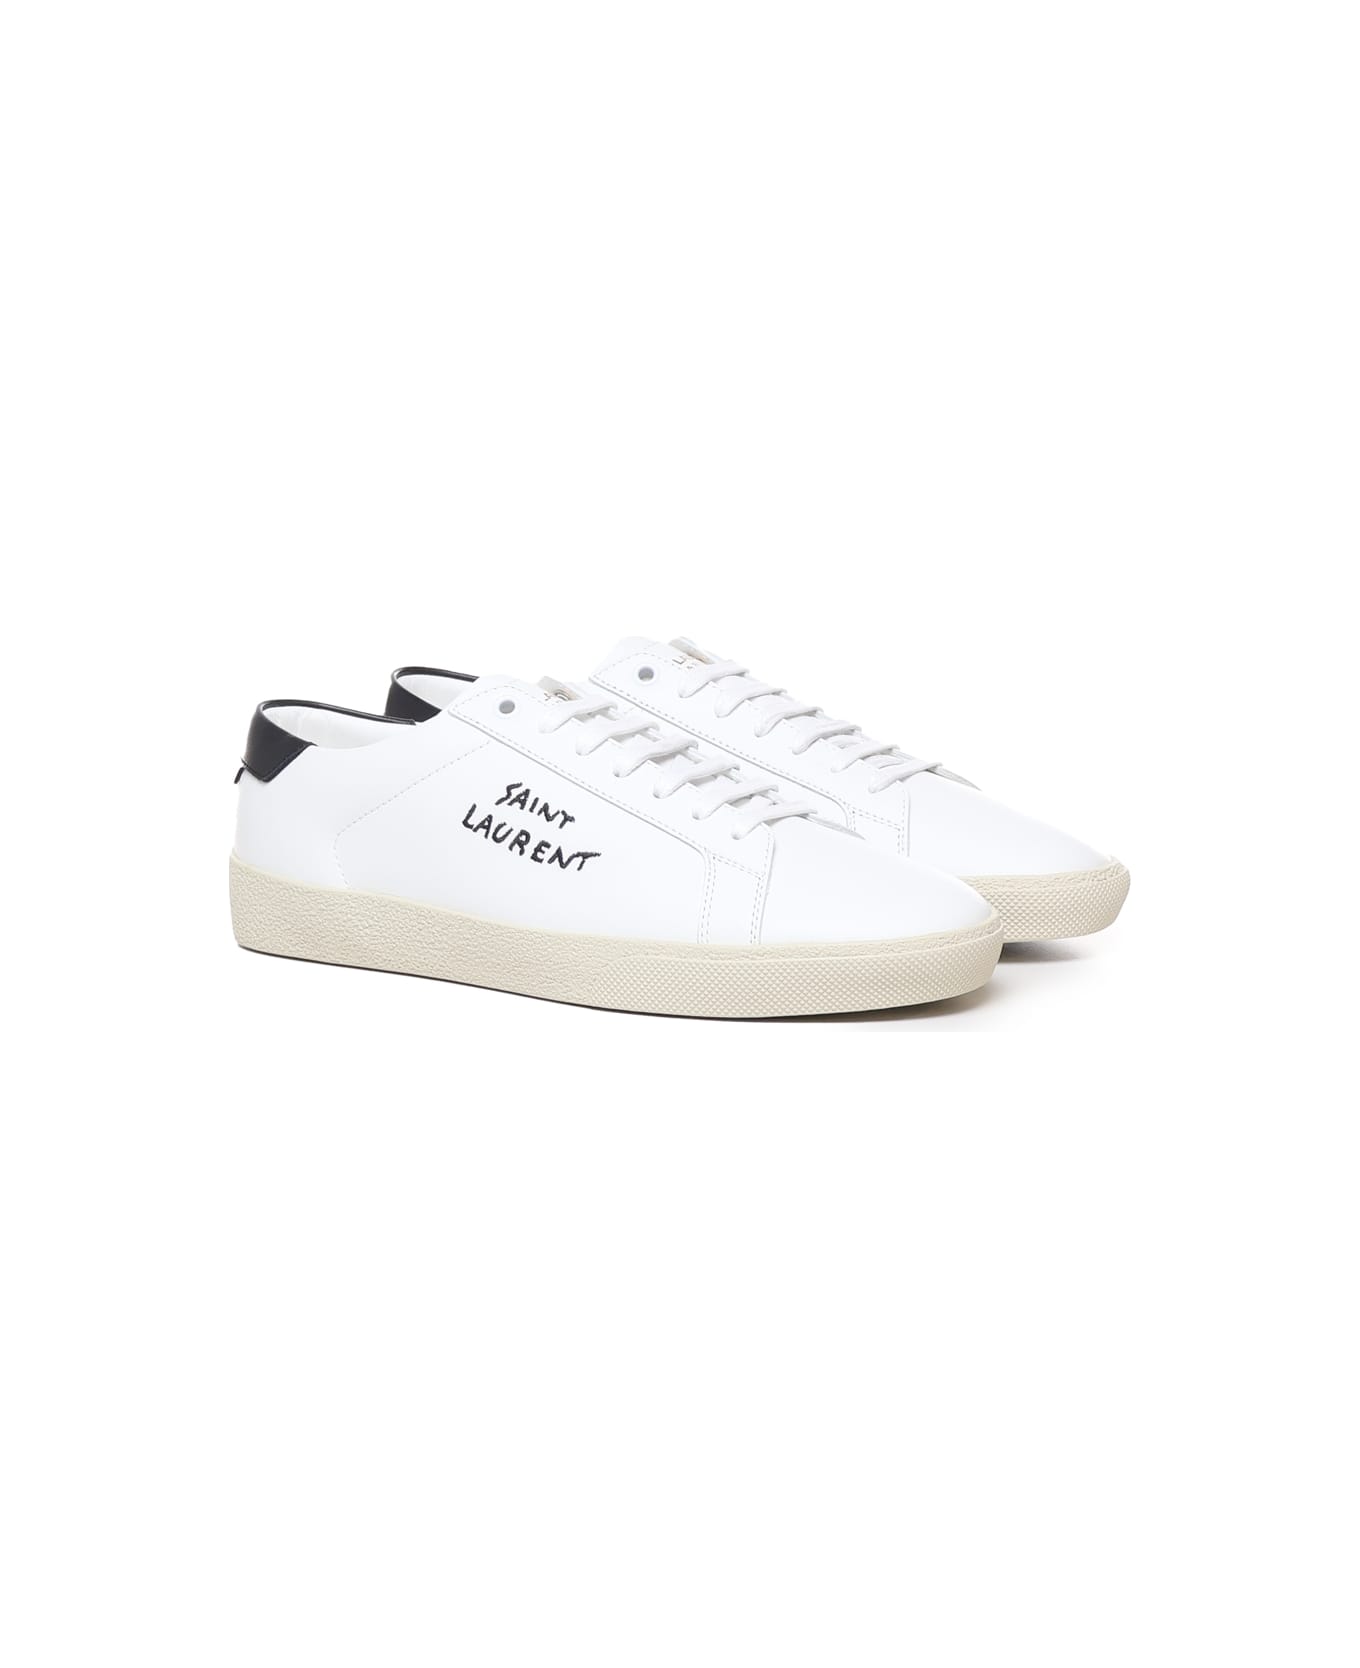 Saint Laurent Sneakers With Embroidery - White